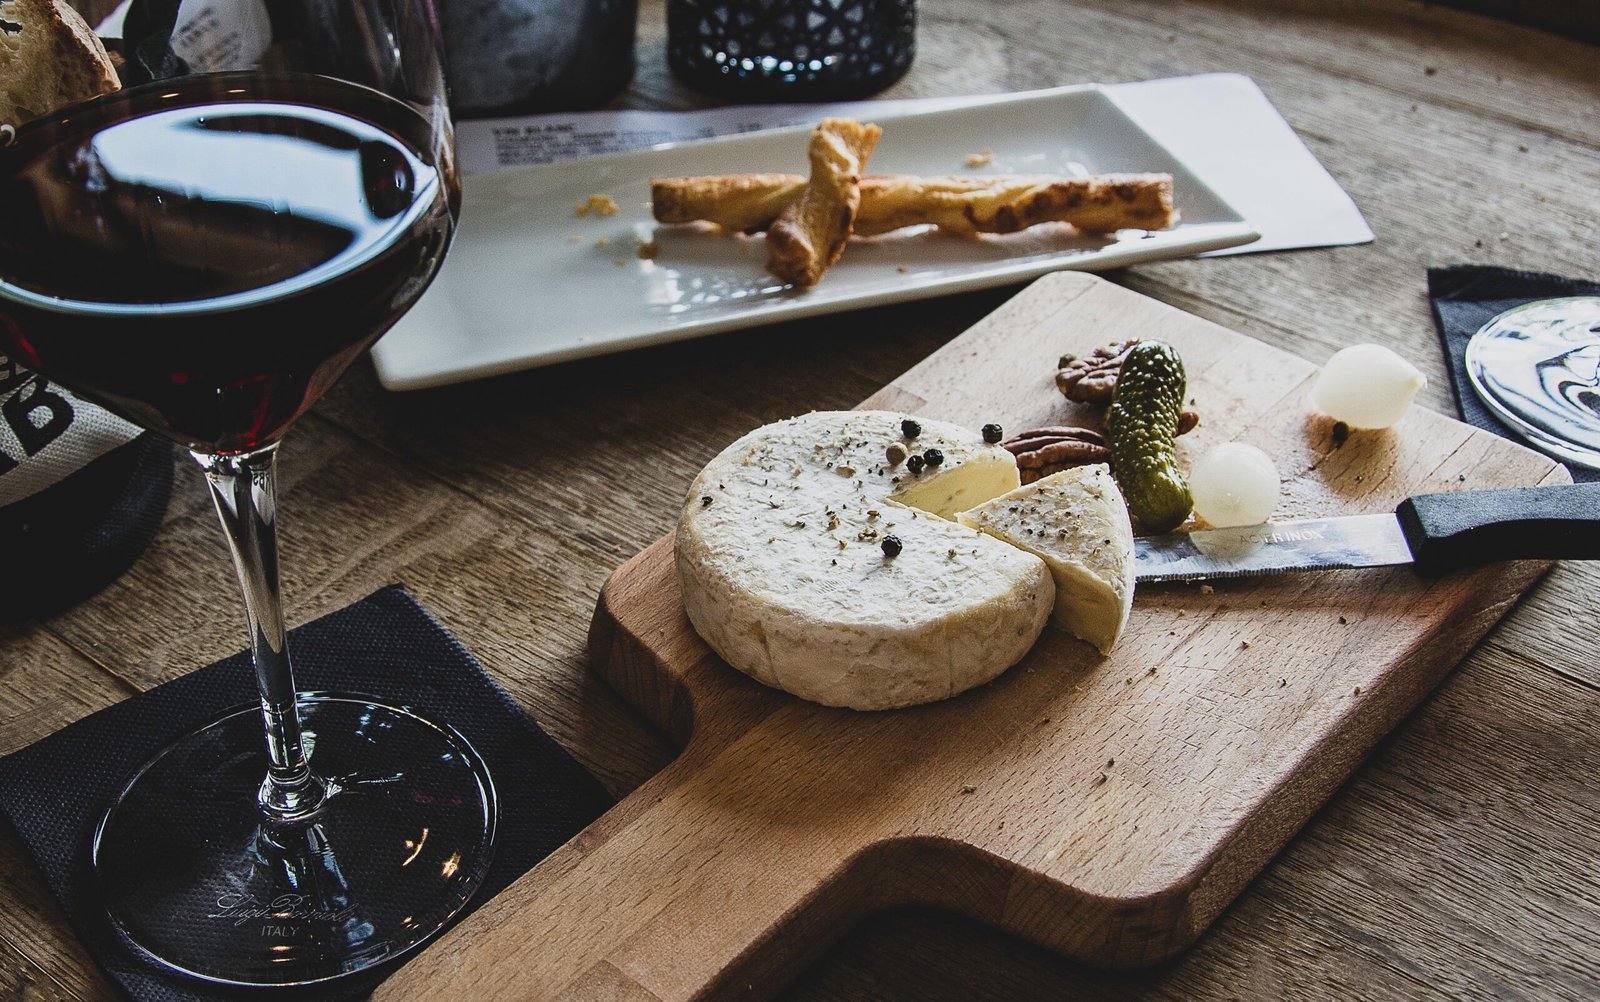 Where to Buy the Perfect Wine and Cheese Baskets Online?